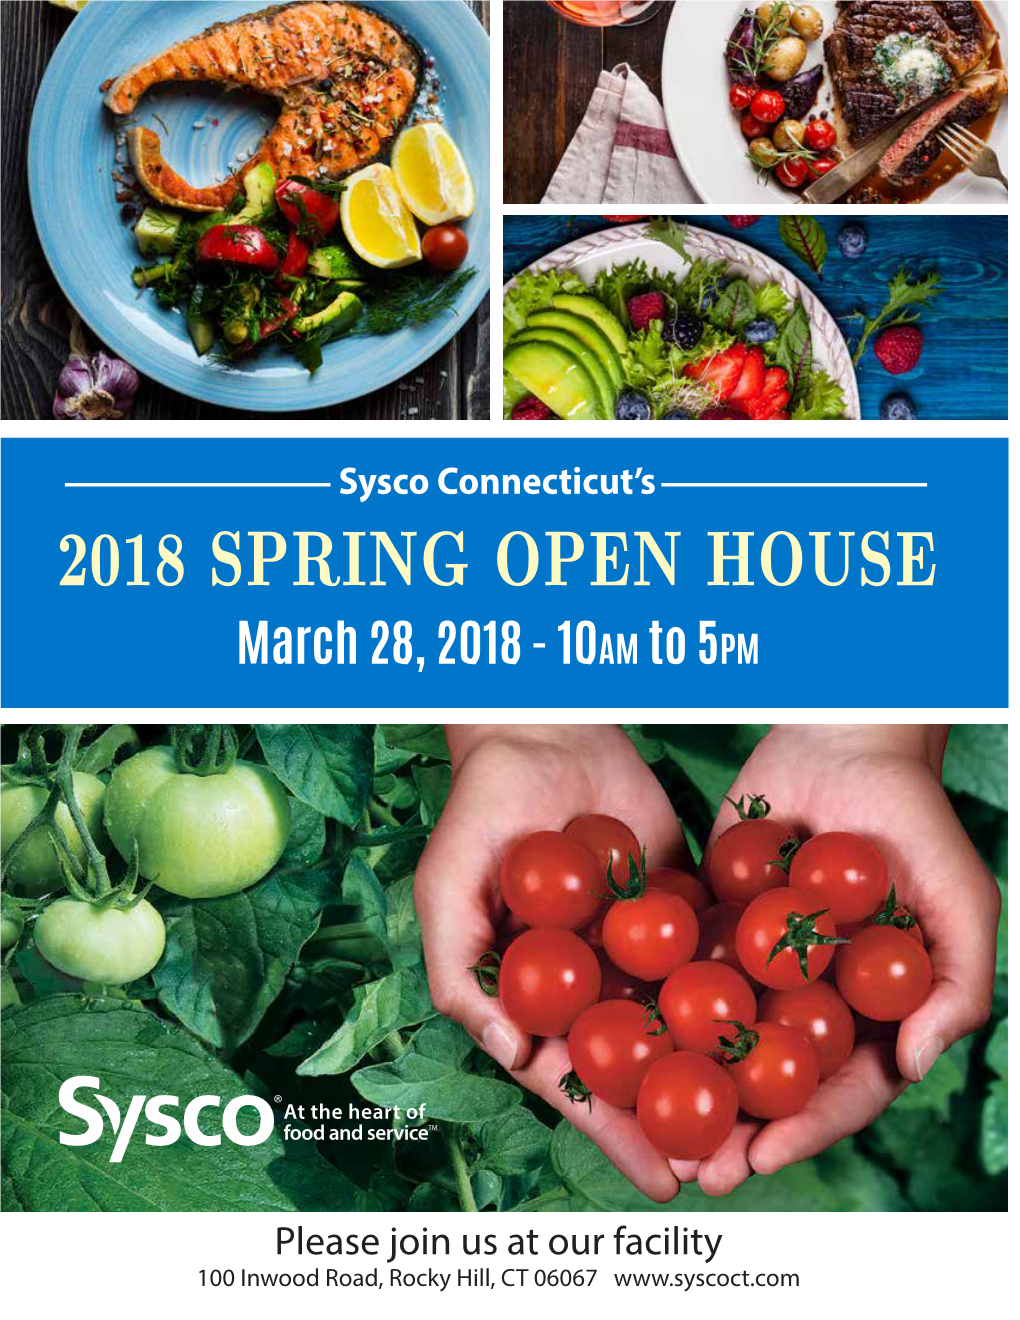 2018 SPRING OPEN HOUSE March 28, 2018 - 10Am to 5Pm